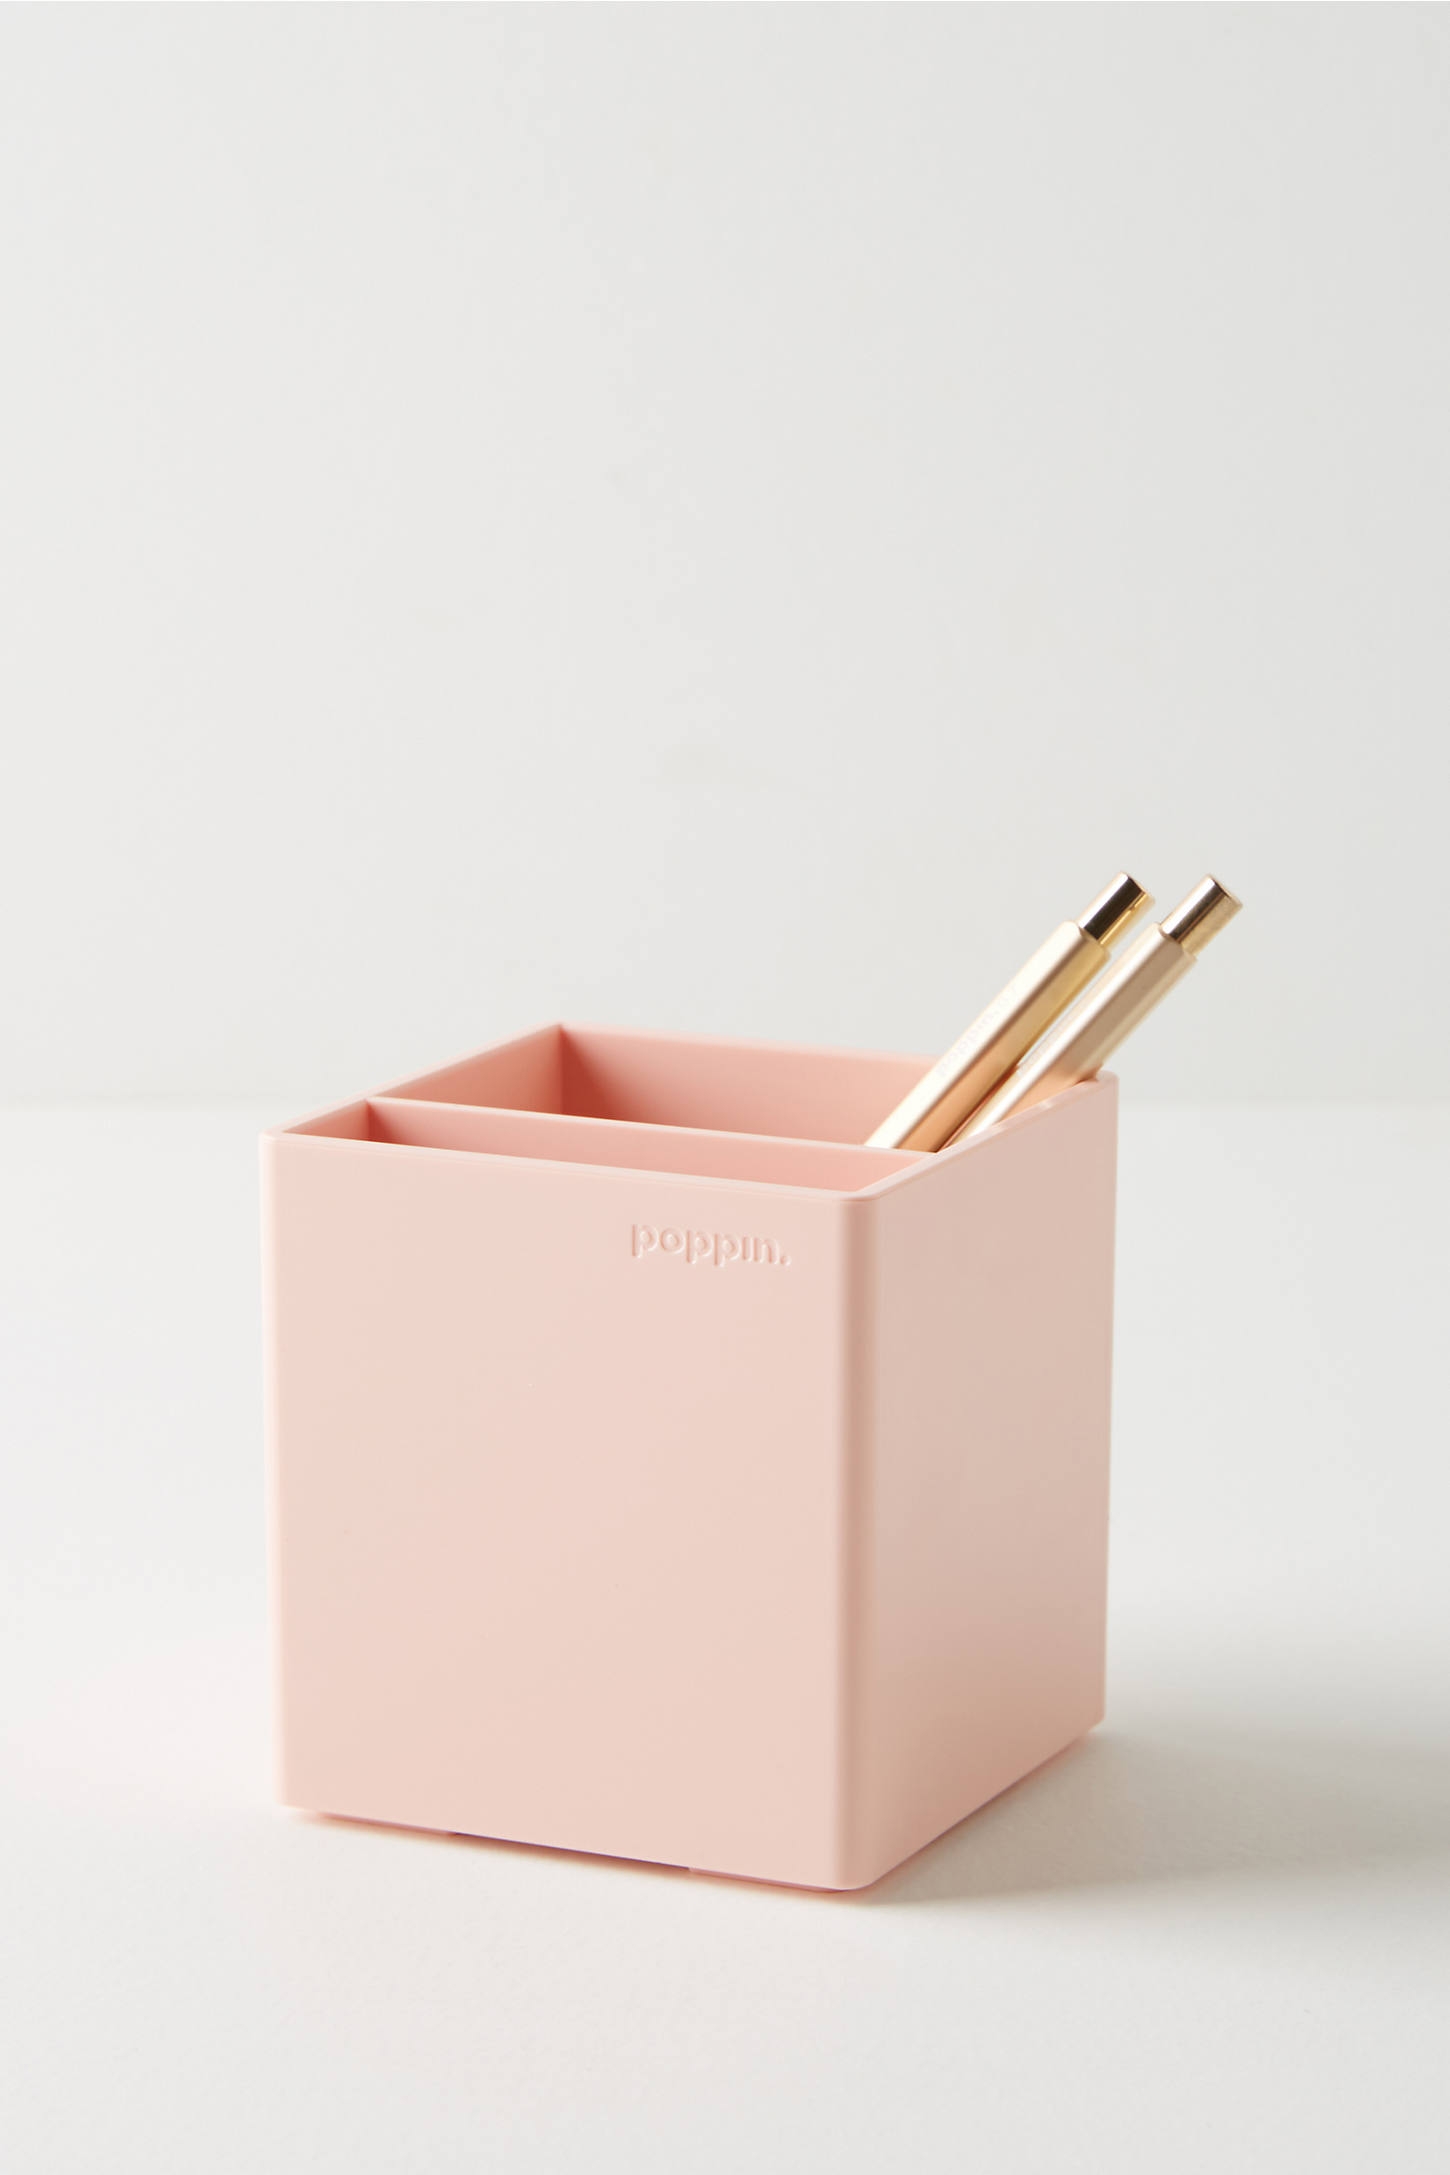 Poppin Blush Pen Cup - Image 0